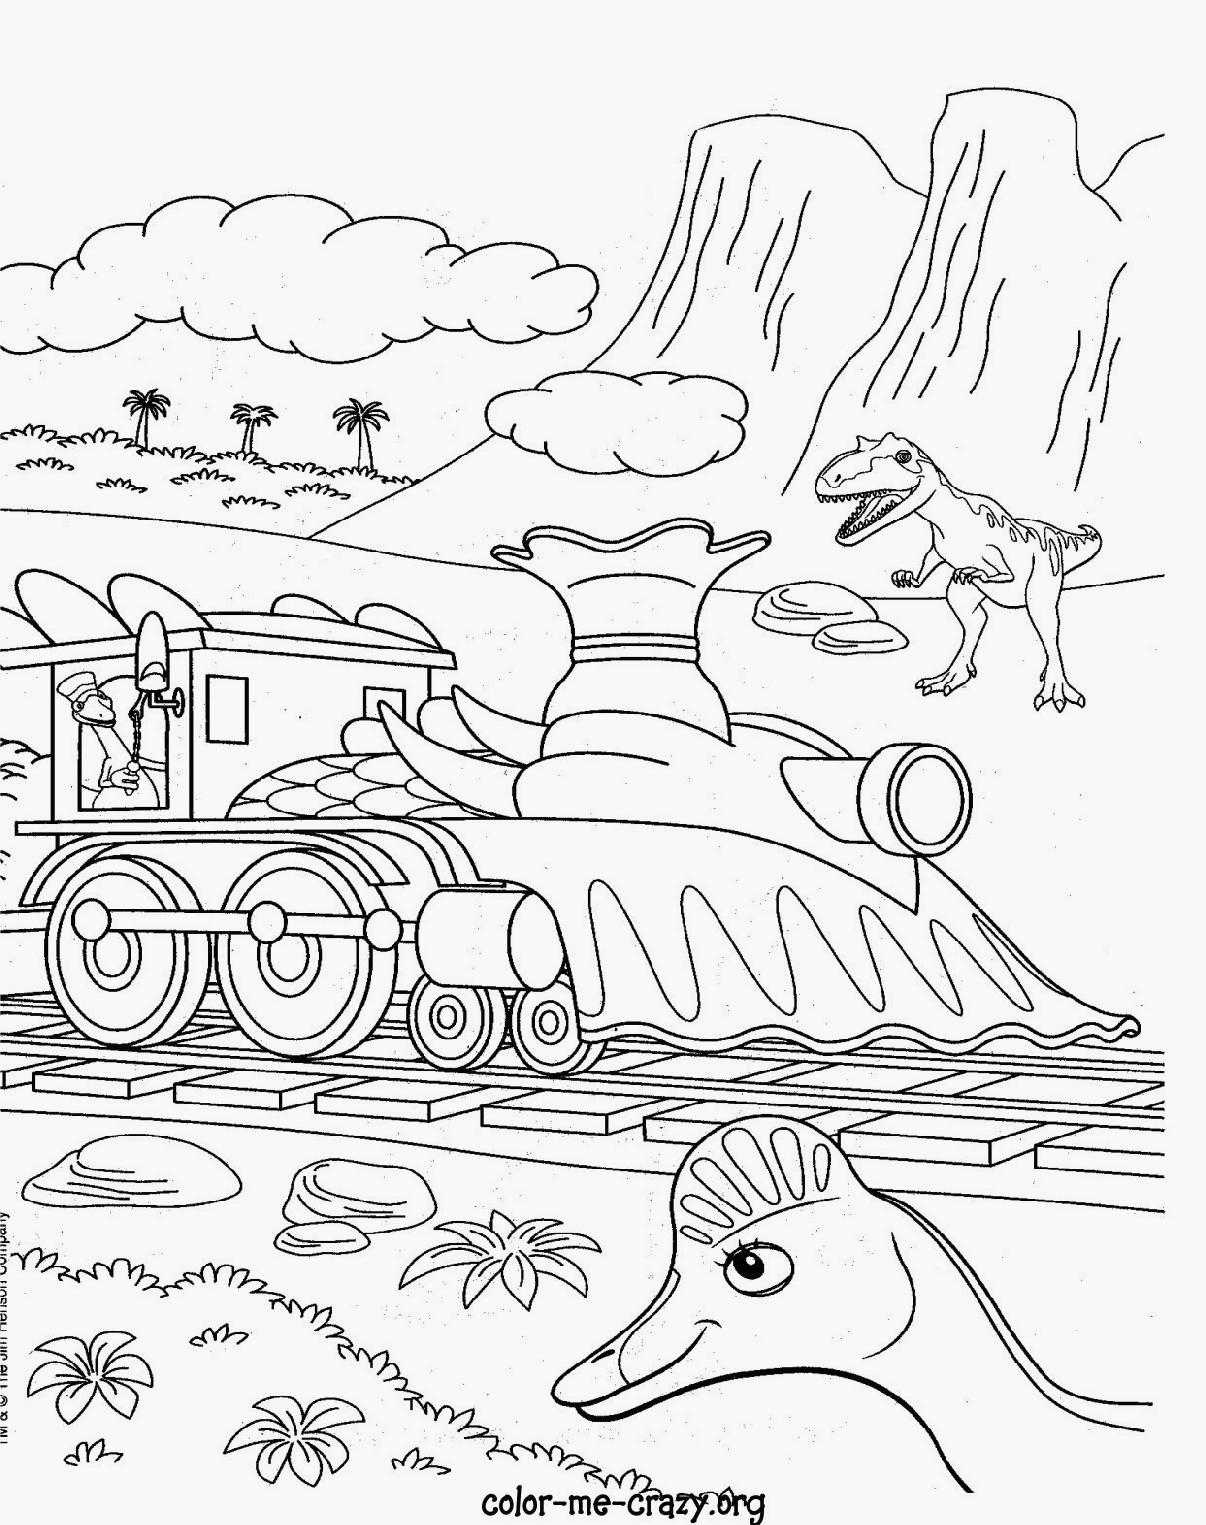 Lego Dinosaur Coloring Pages at GetColorings.com | Free ...